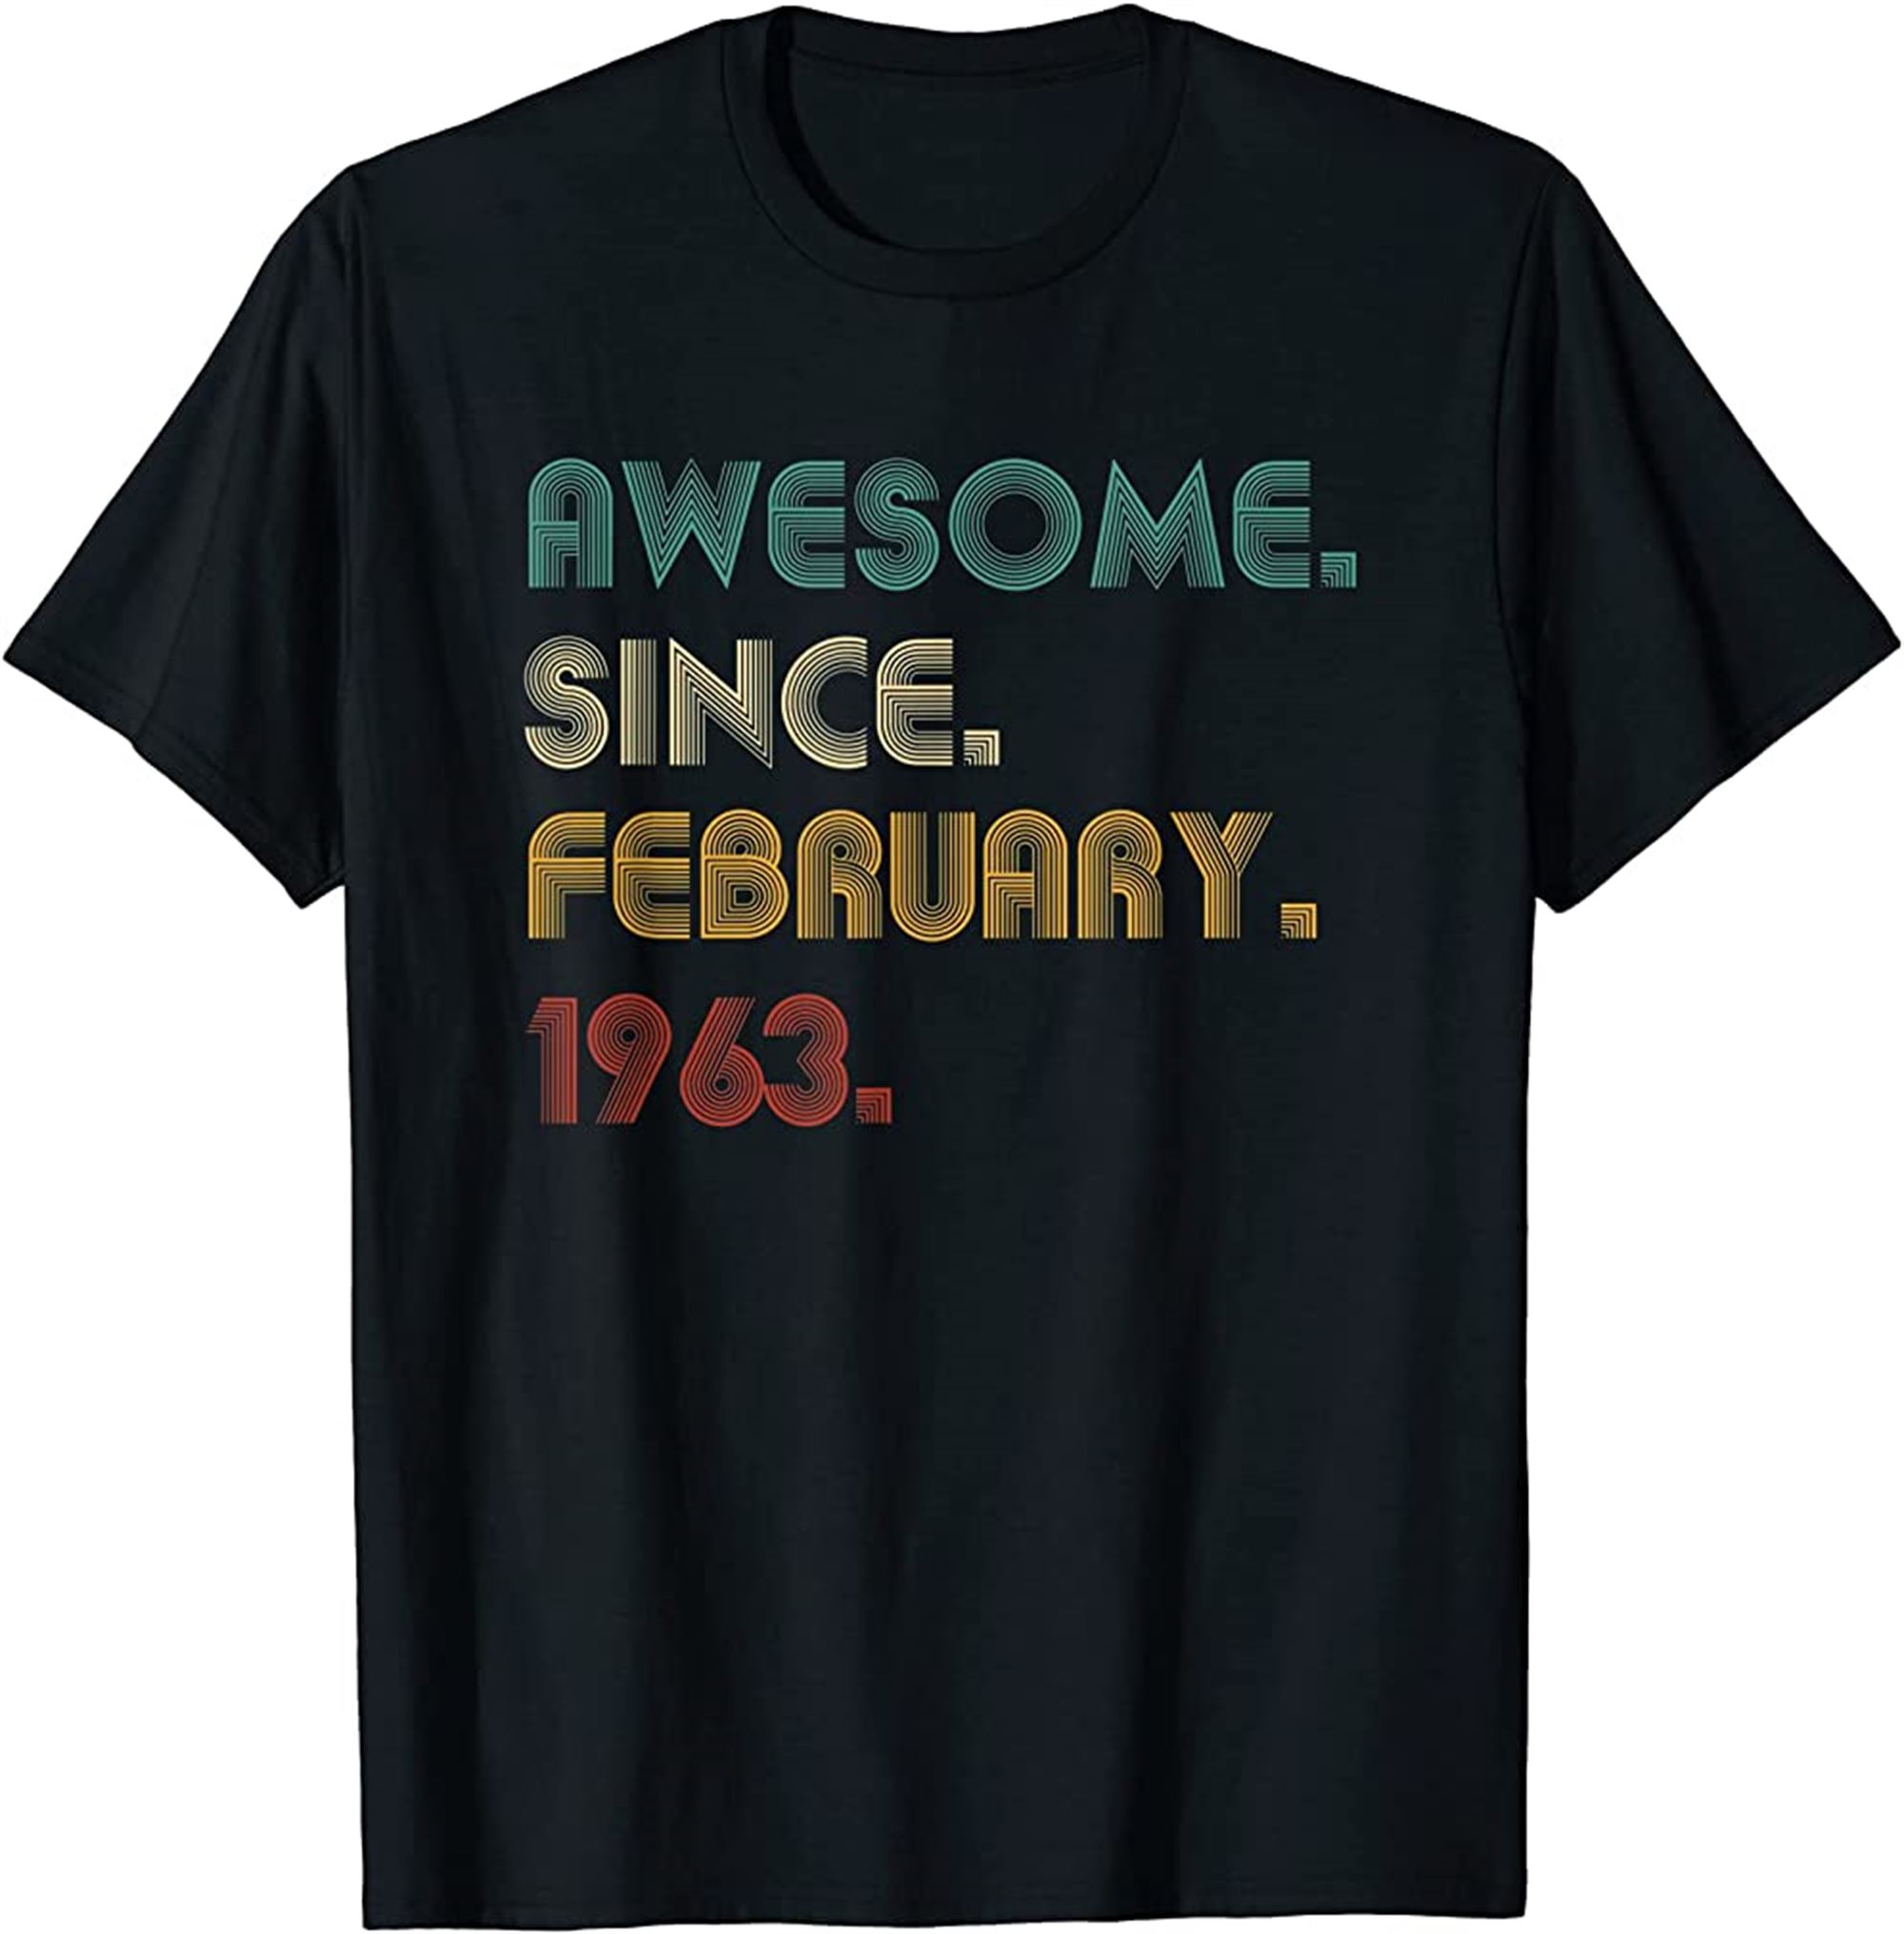 59 Year Old Awesome Since February 1963 Gifts 59th Birthday T-shirt Full Size Up To 5xl